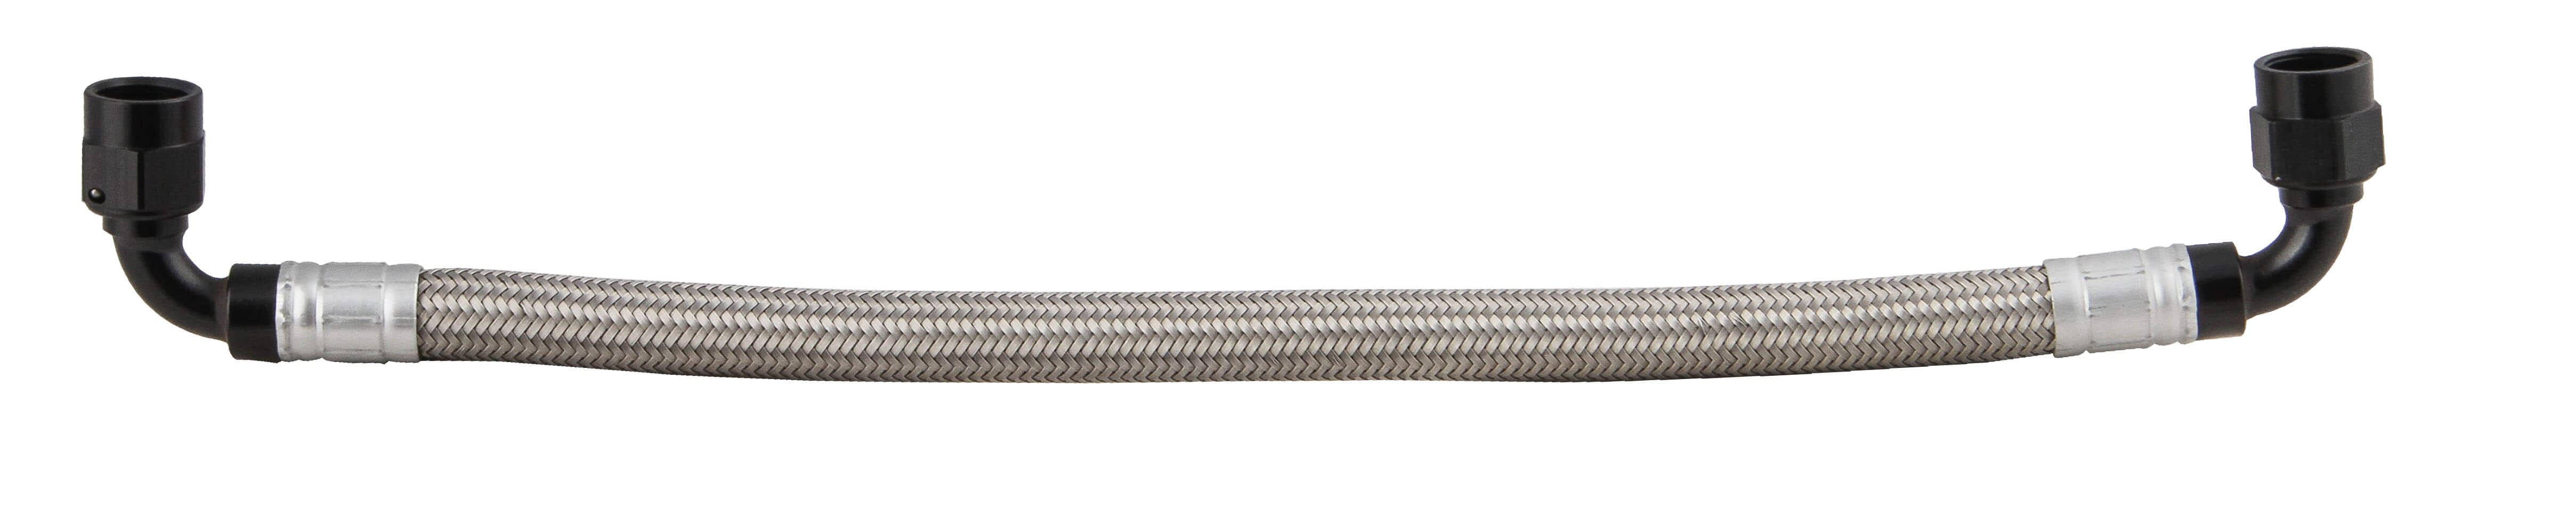 Earls GM LS Fuel Rail Cross-Over Hose -6 Stainless Braided Hose